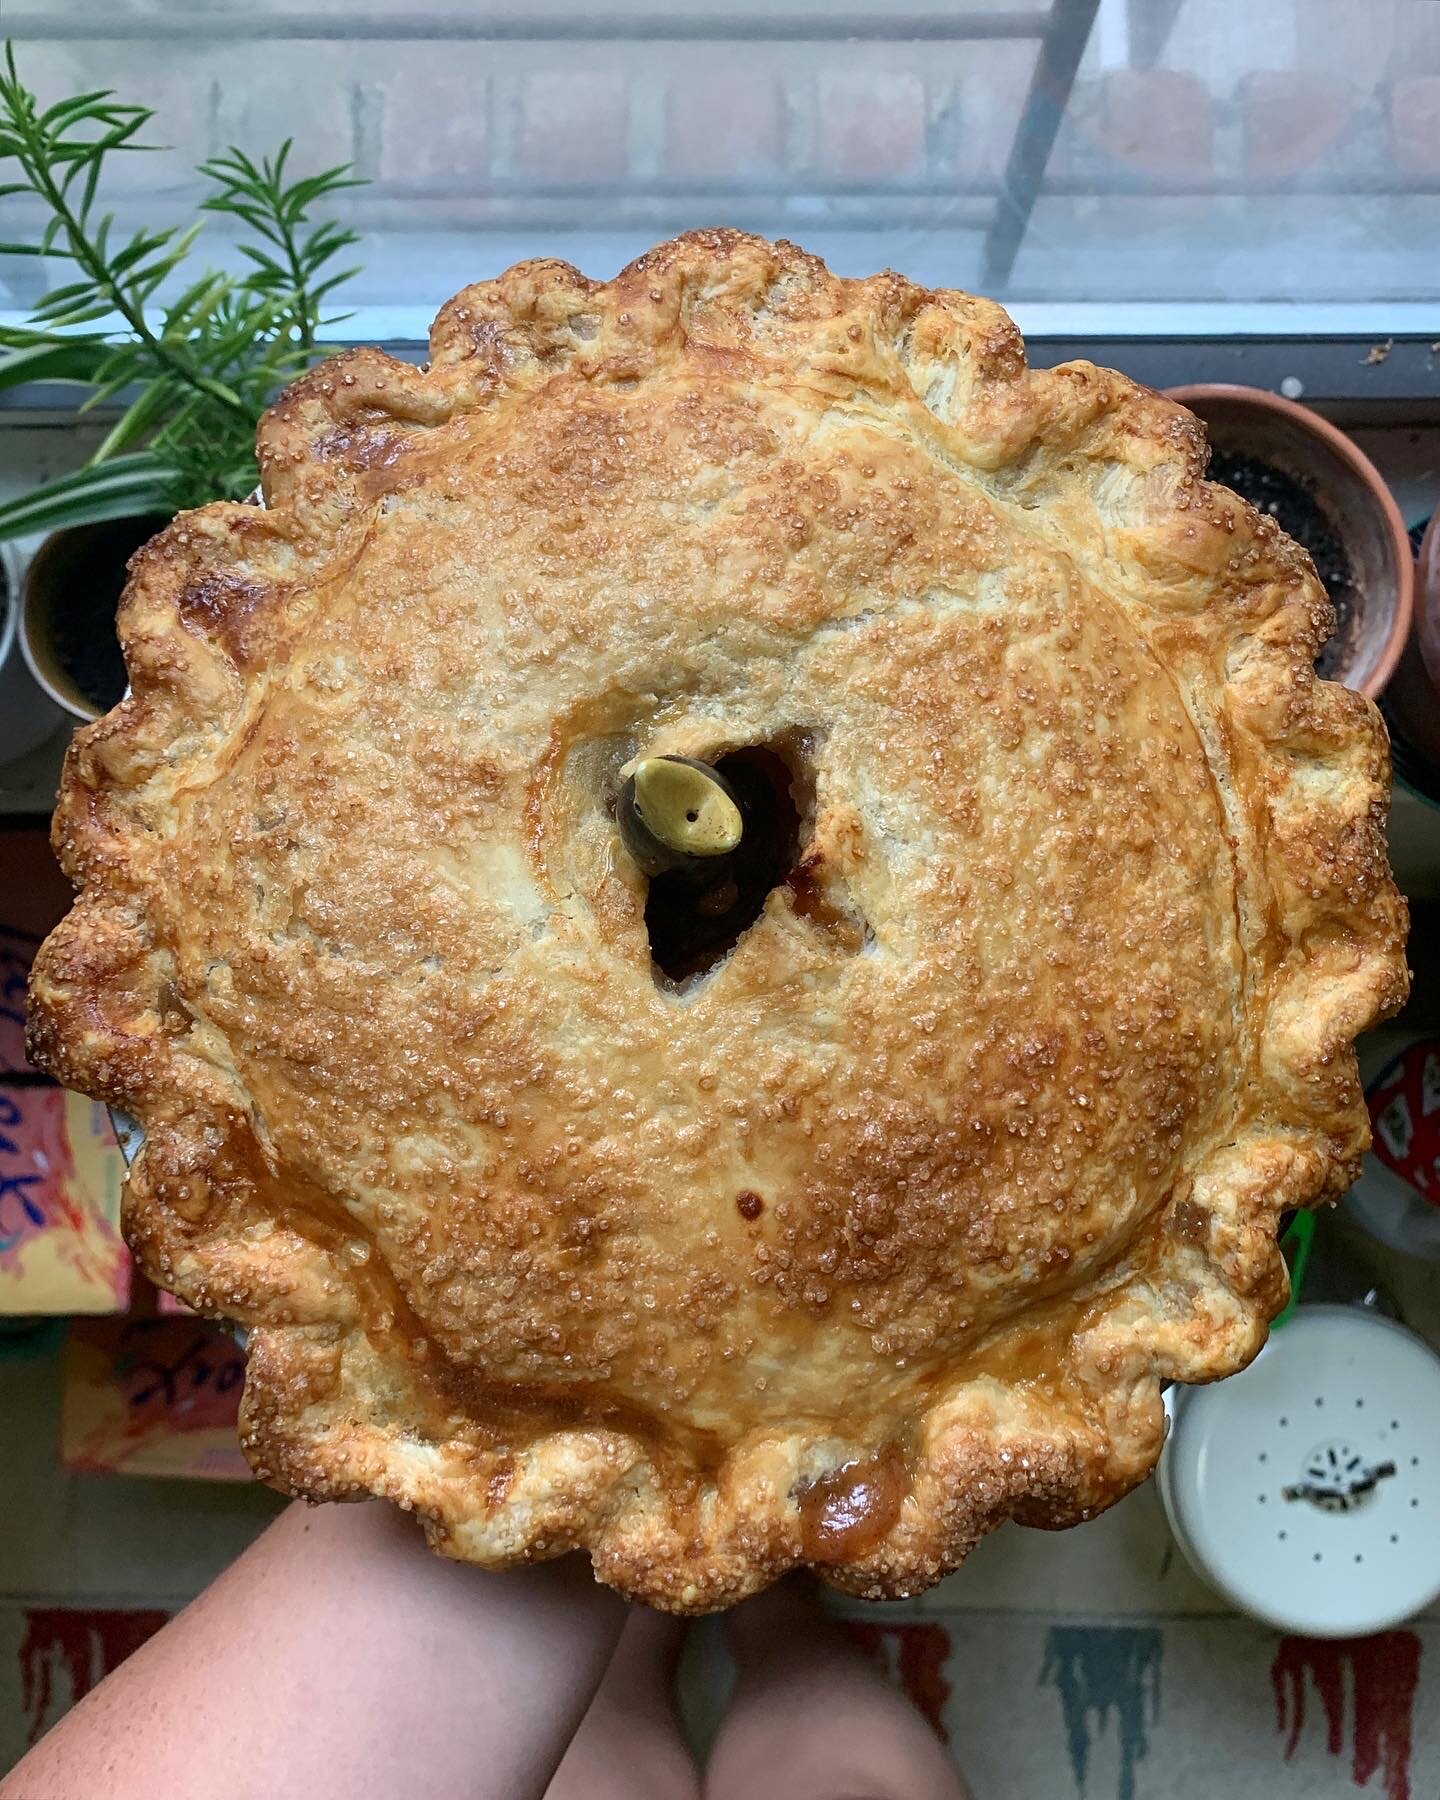 Best Old Fashioned Apple Pie Recipe - The Gracious Wife